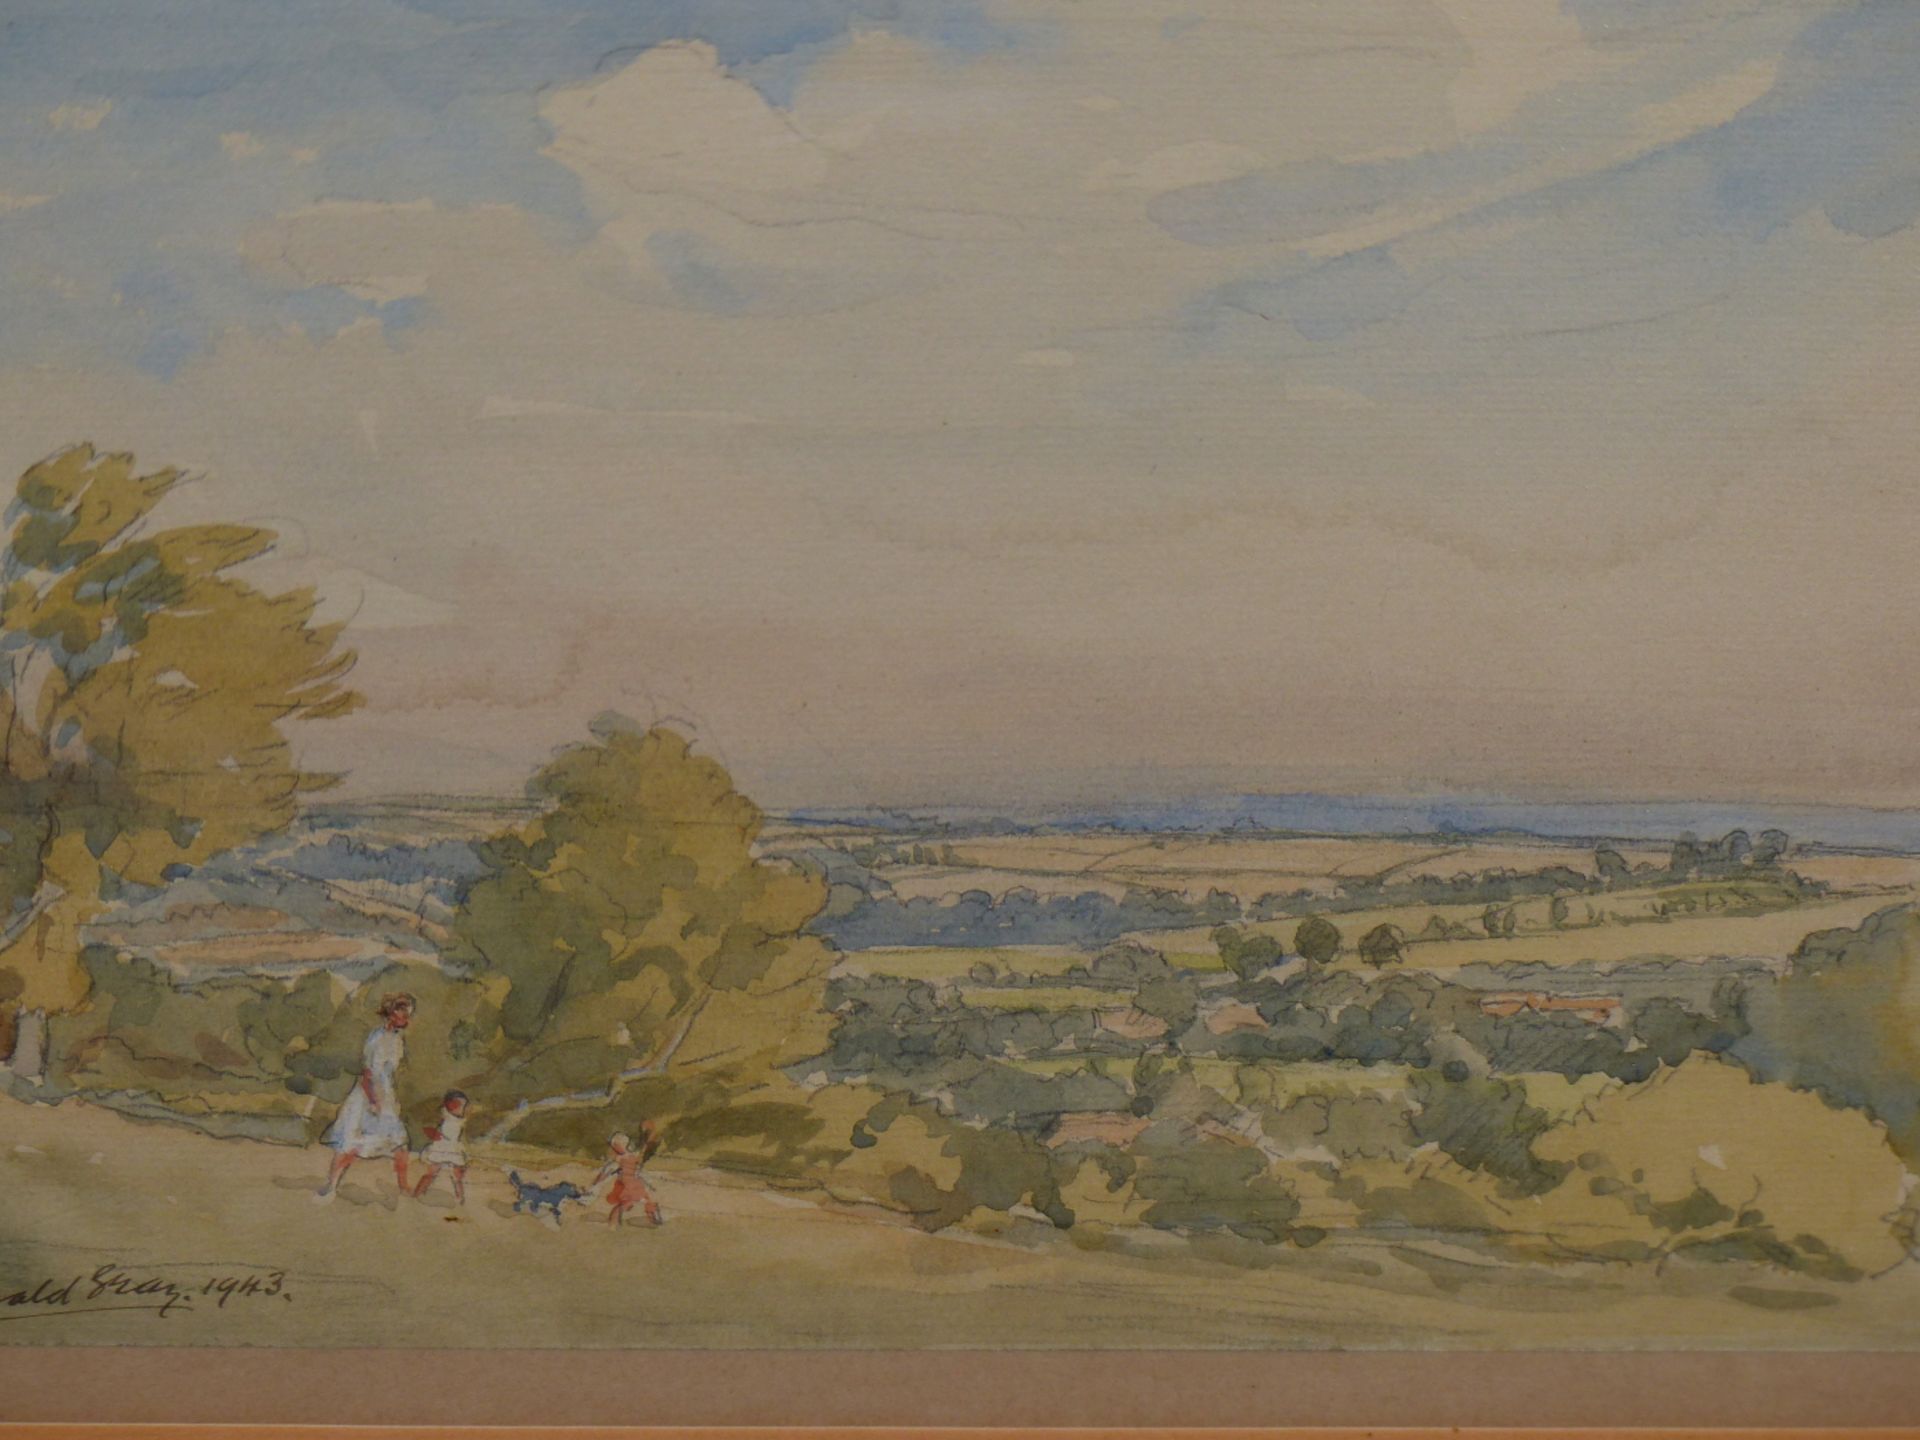 RONALD GRAY (1868-1951) AN AFTERNOON WALK, WATERCOLOUR. SIGNED L/L AND DATED 1943. 30 X 22 cm. - Image 4 of 7